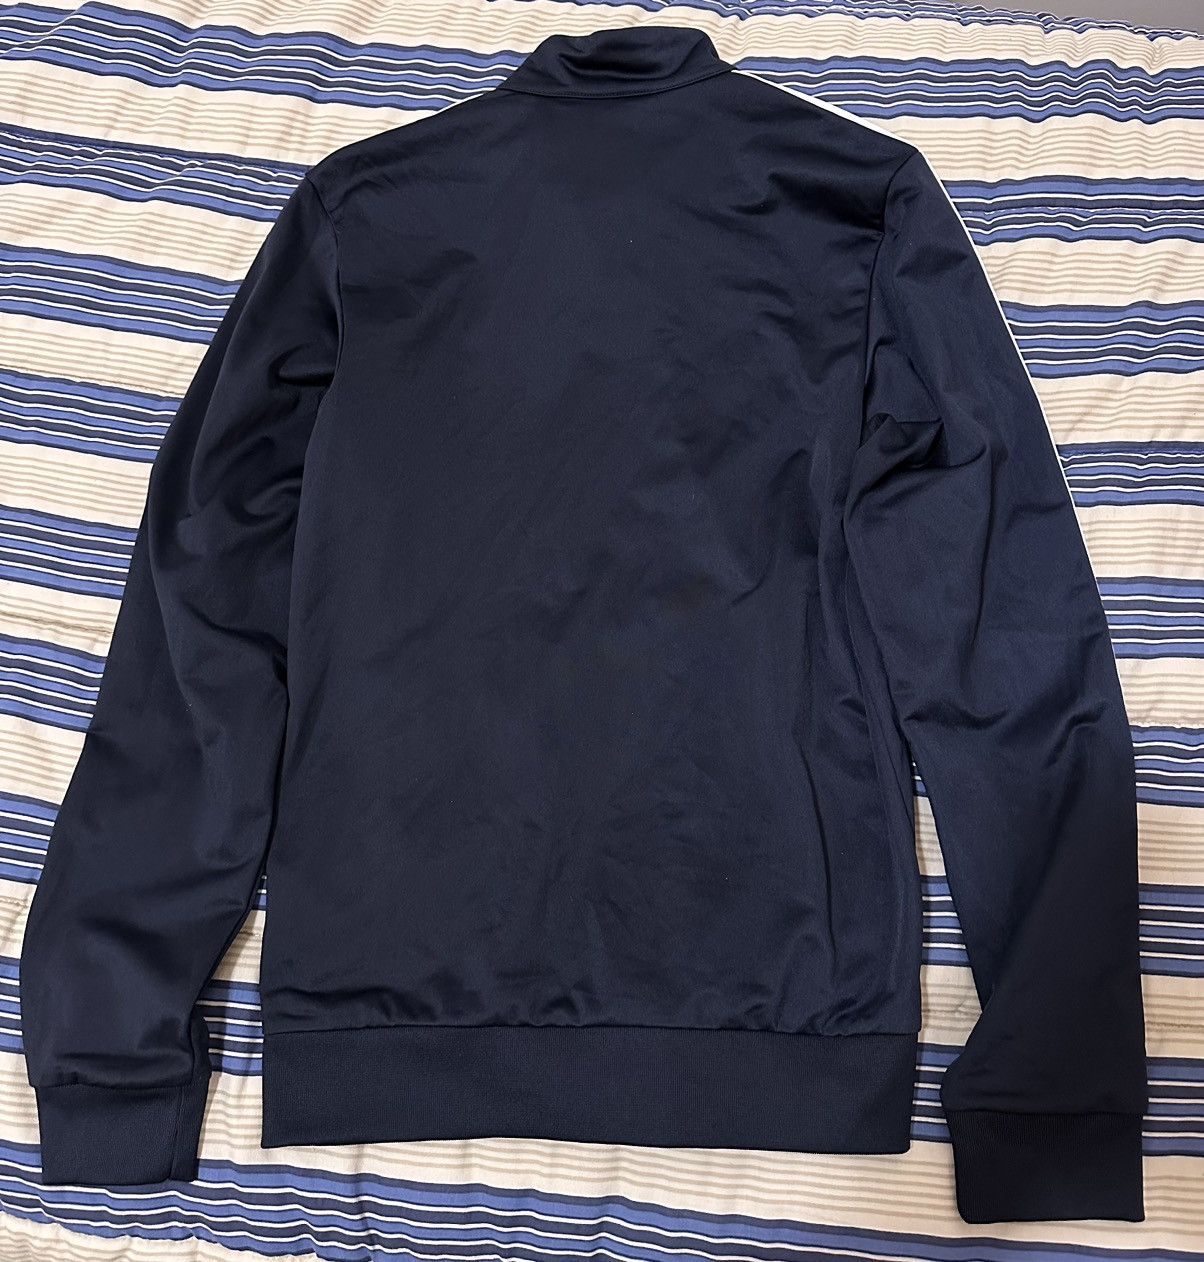 Adidas adidas navy track jacket Size US S / EU 44-46 / 1 - 4 Preview